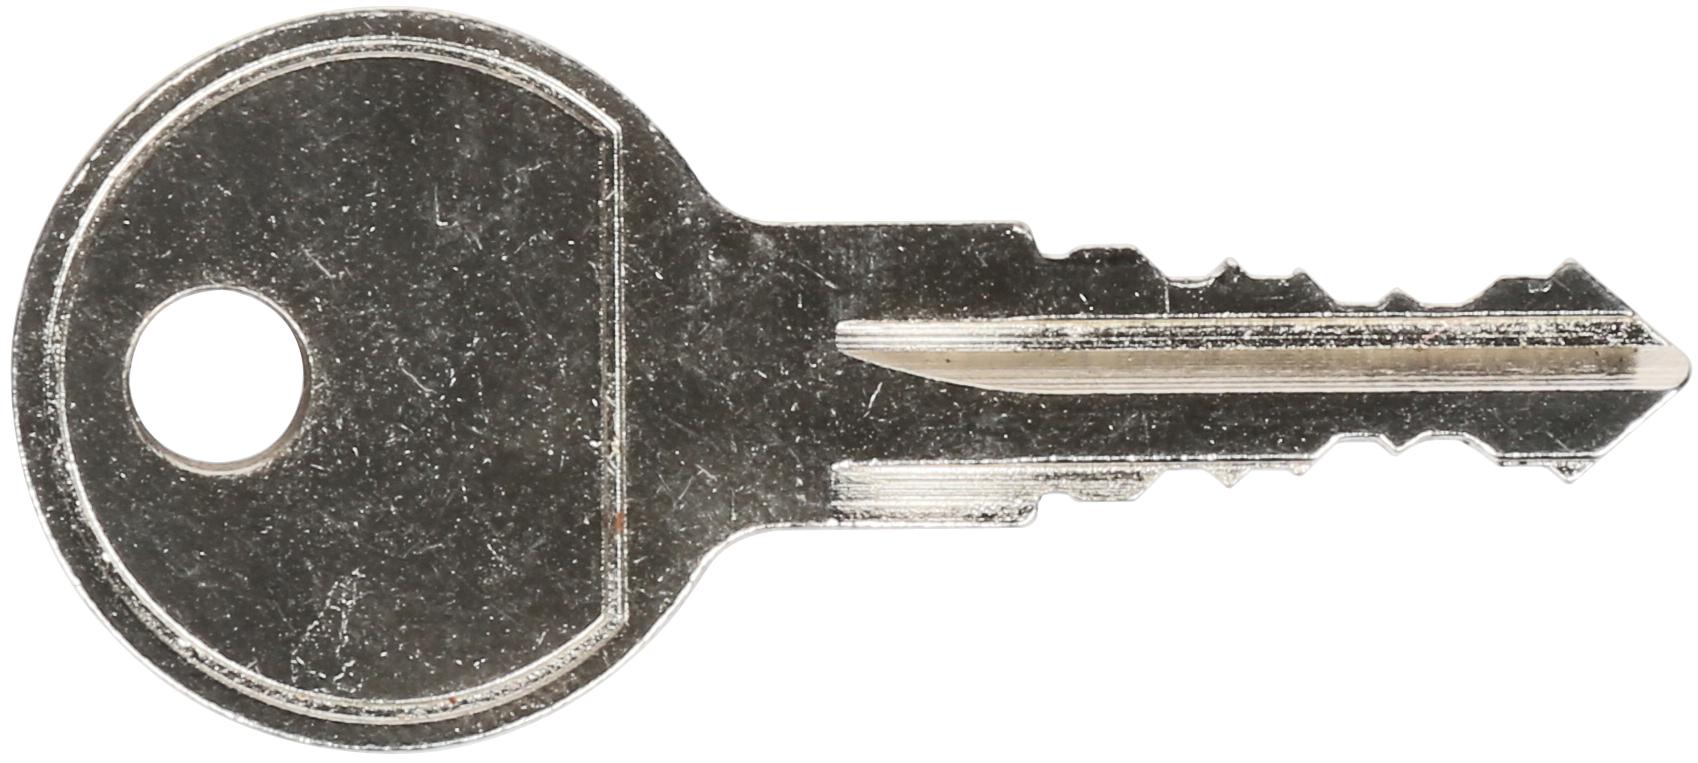 Spare Roof Box Key 165